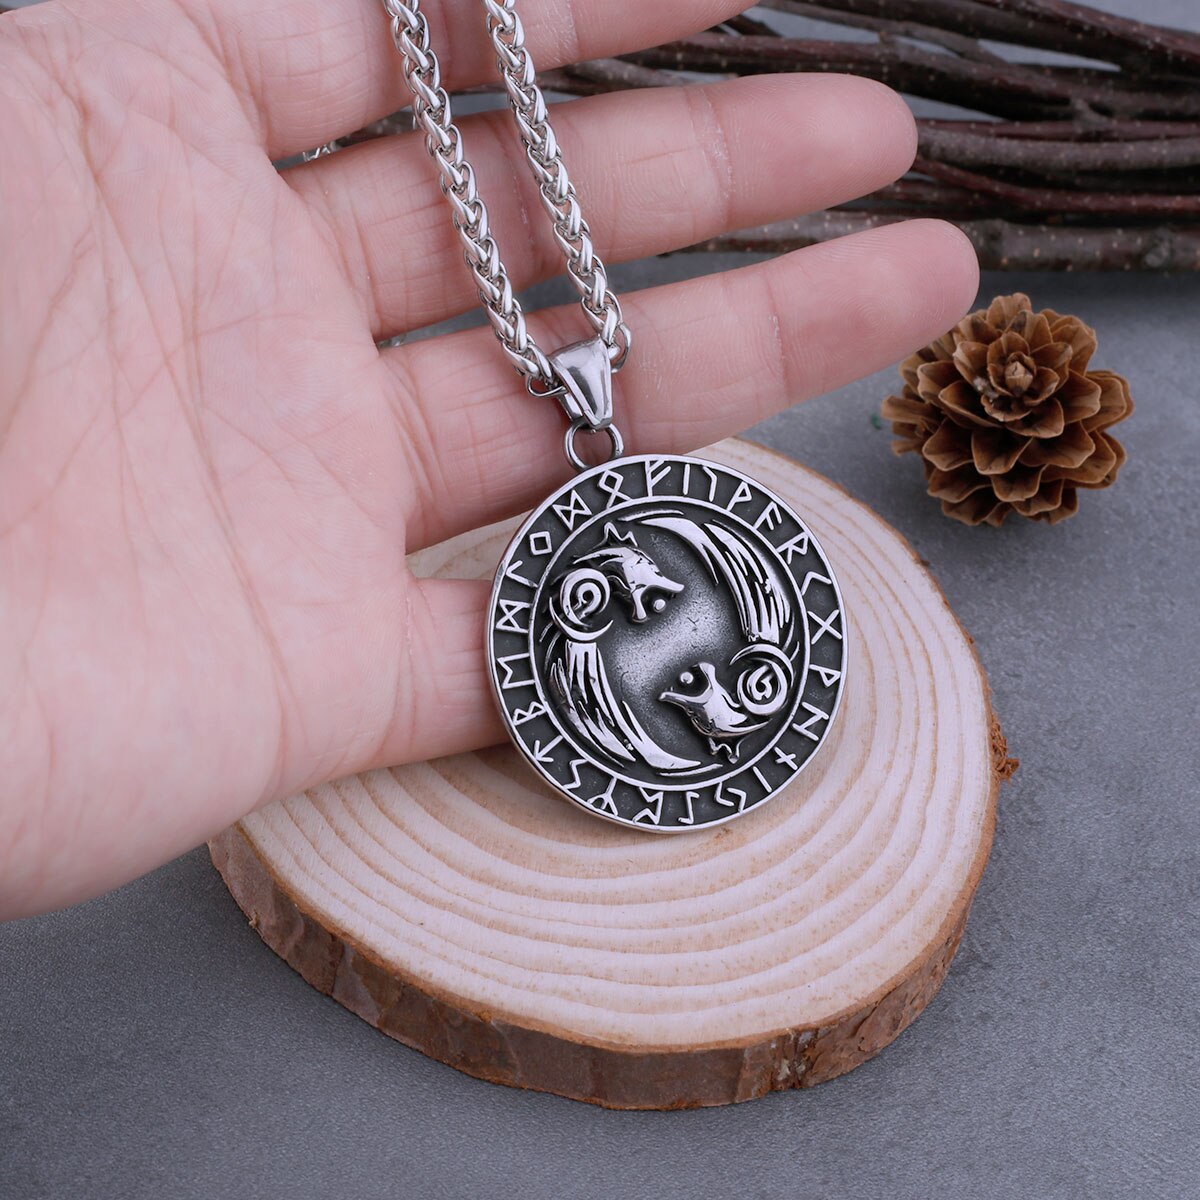 Stainless Steel Vintage Viking Wolf Head Necklace Men's Charm Odin Rune Amulet Wolf Pendant Scandinavian Jewelry as Gift for Men